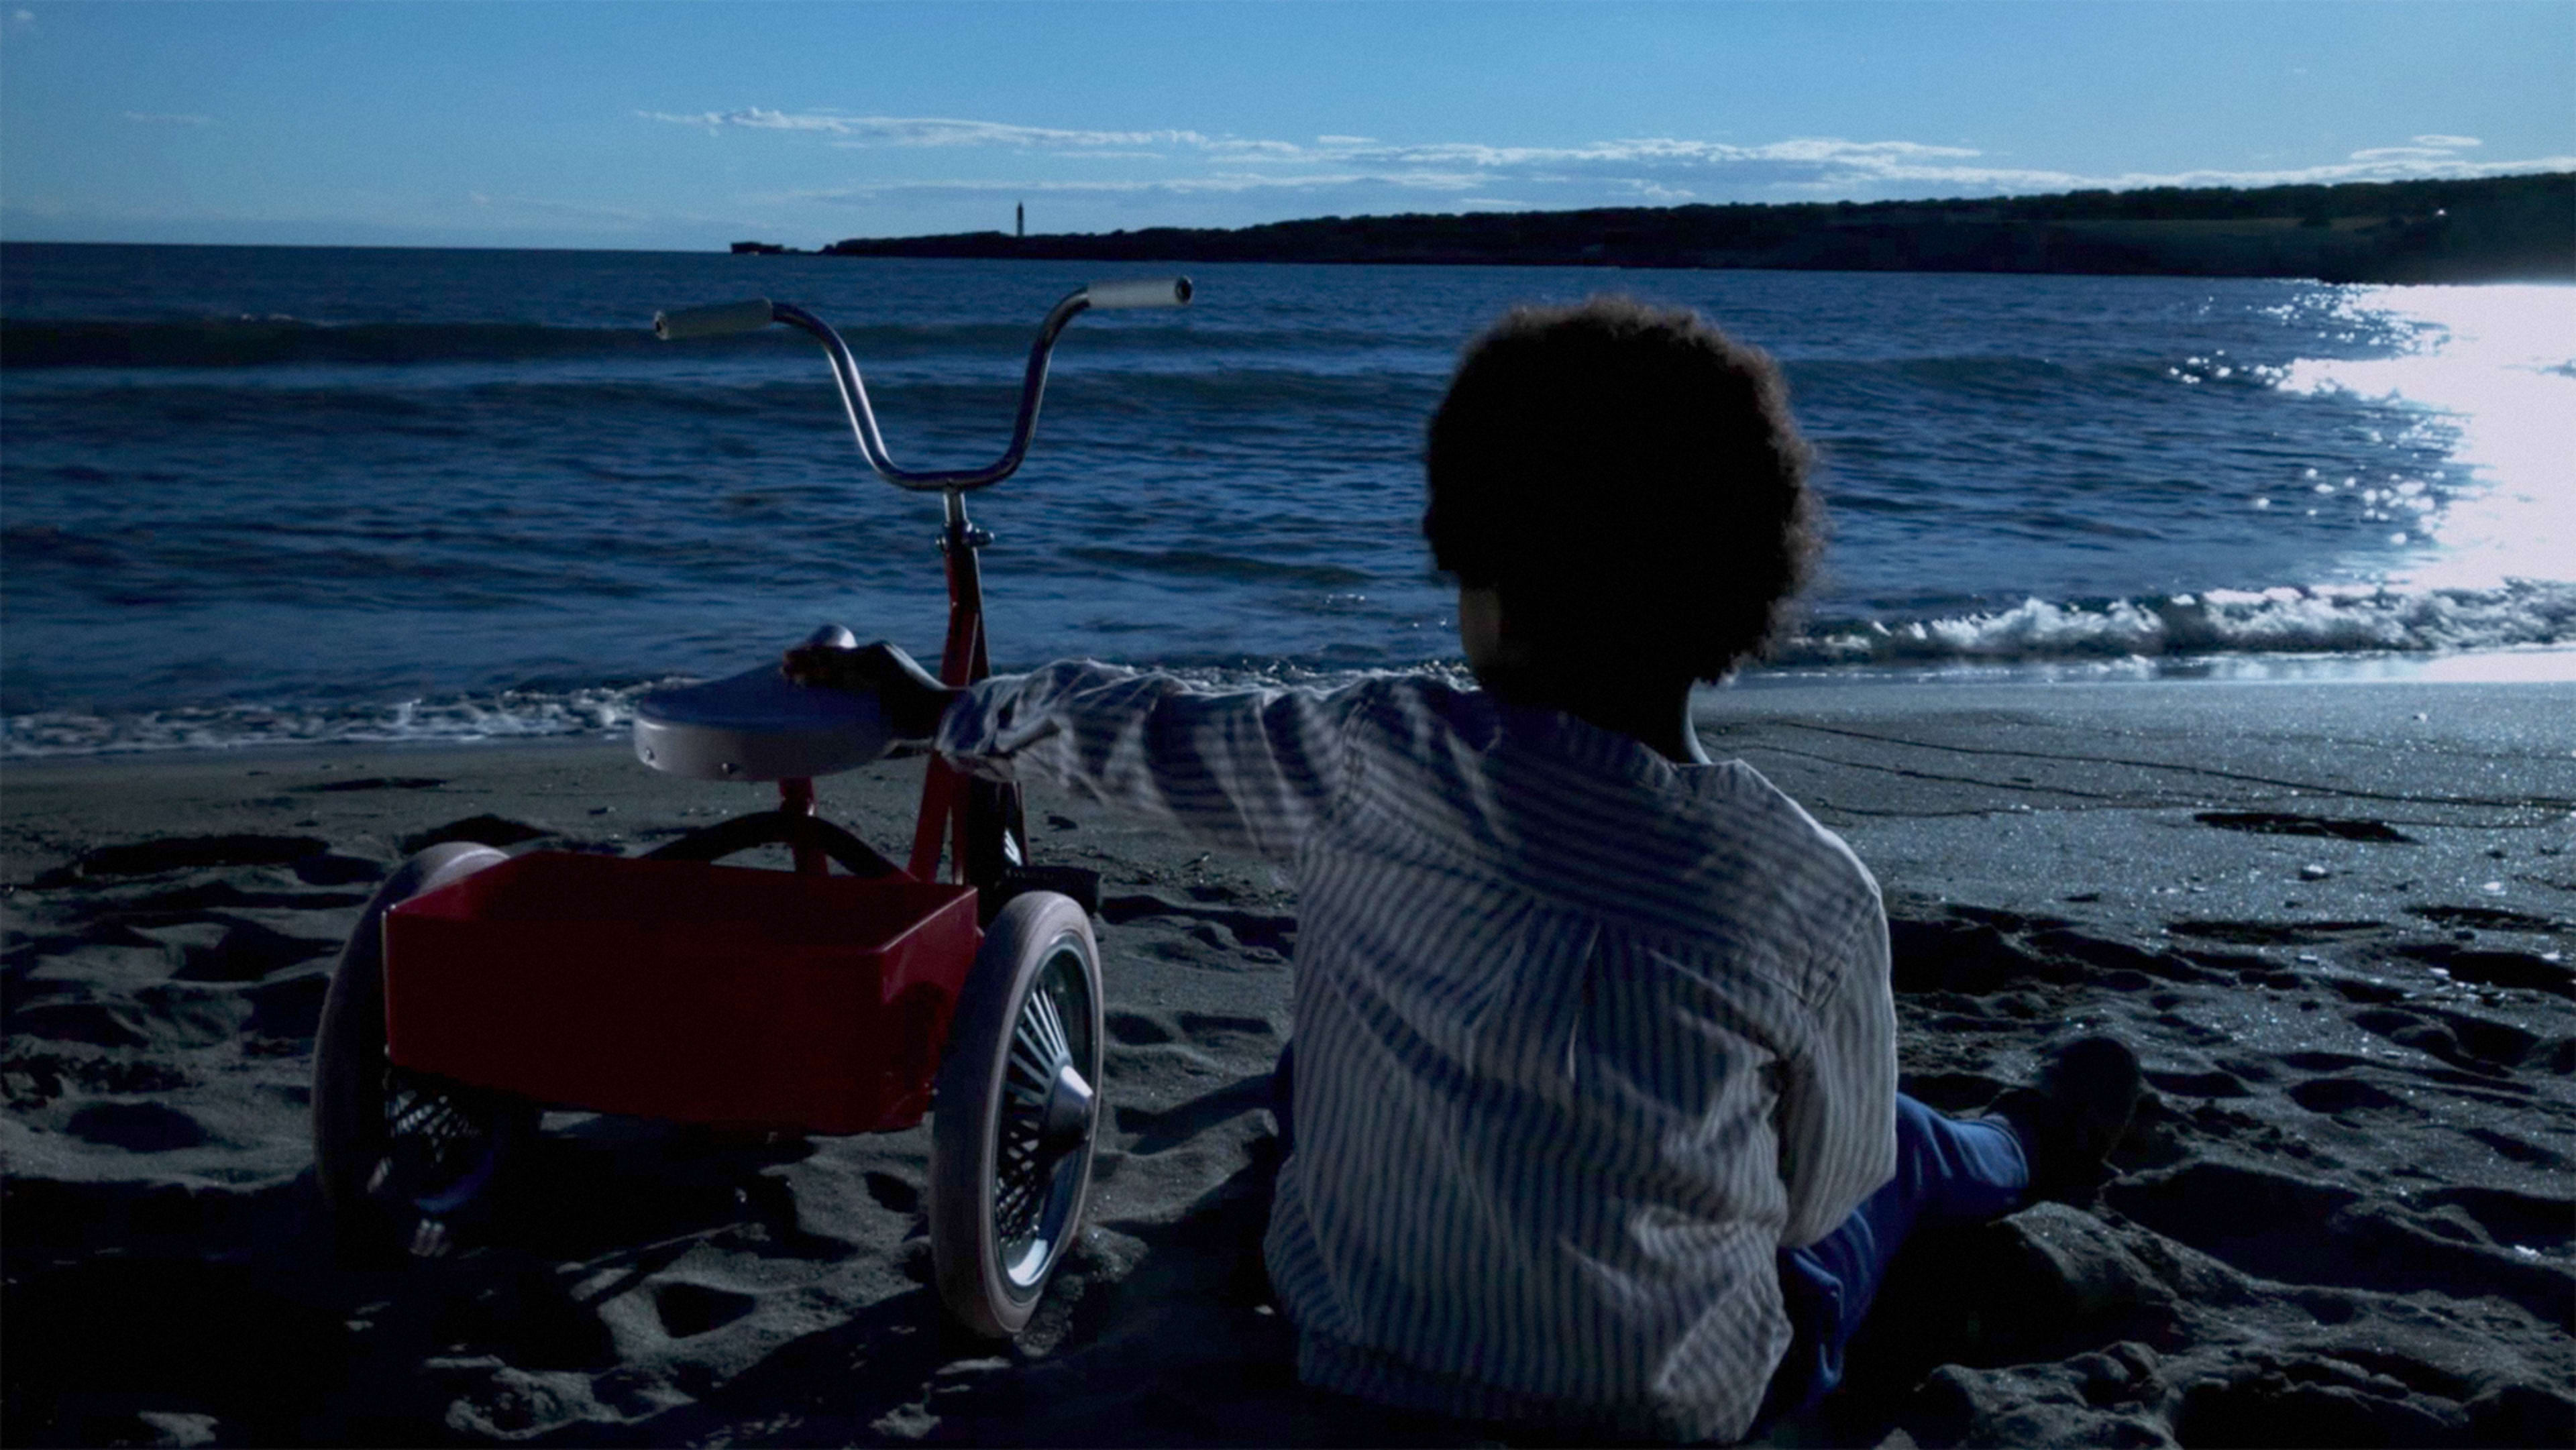 Apple Asked Michel Gondry To Direct a Short Film On His iPhone And This Is What He Made